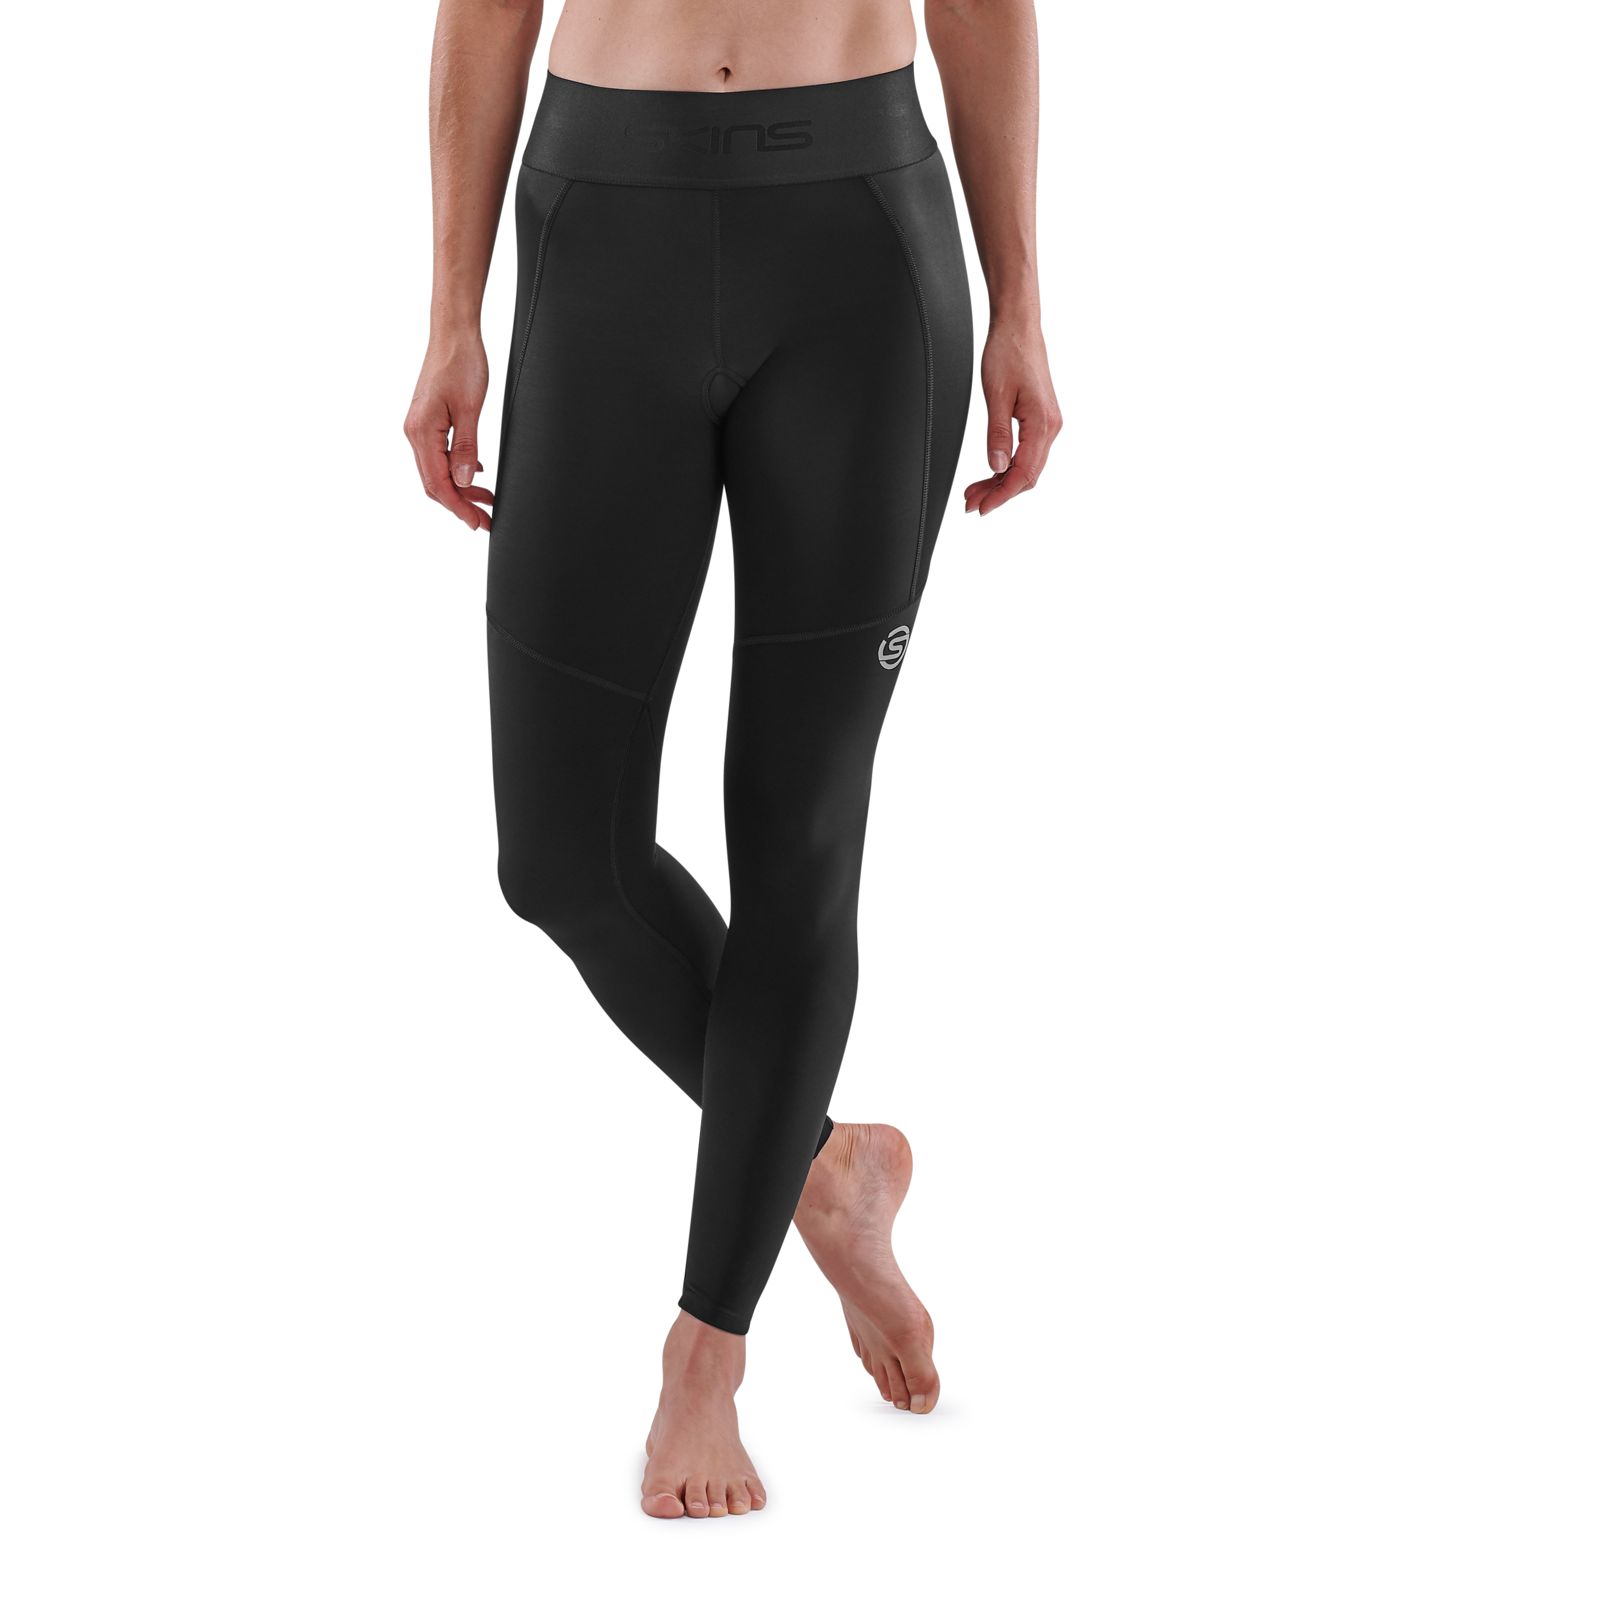 SKINS Compression 3-Series Women's Thermal Long Tights - Black